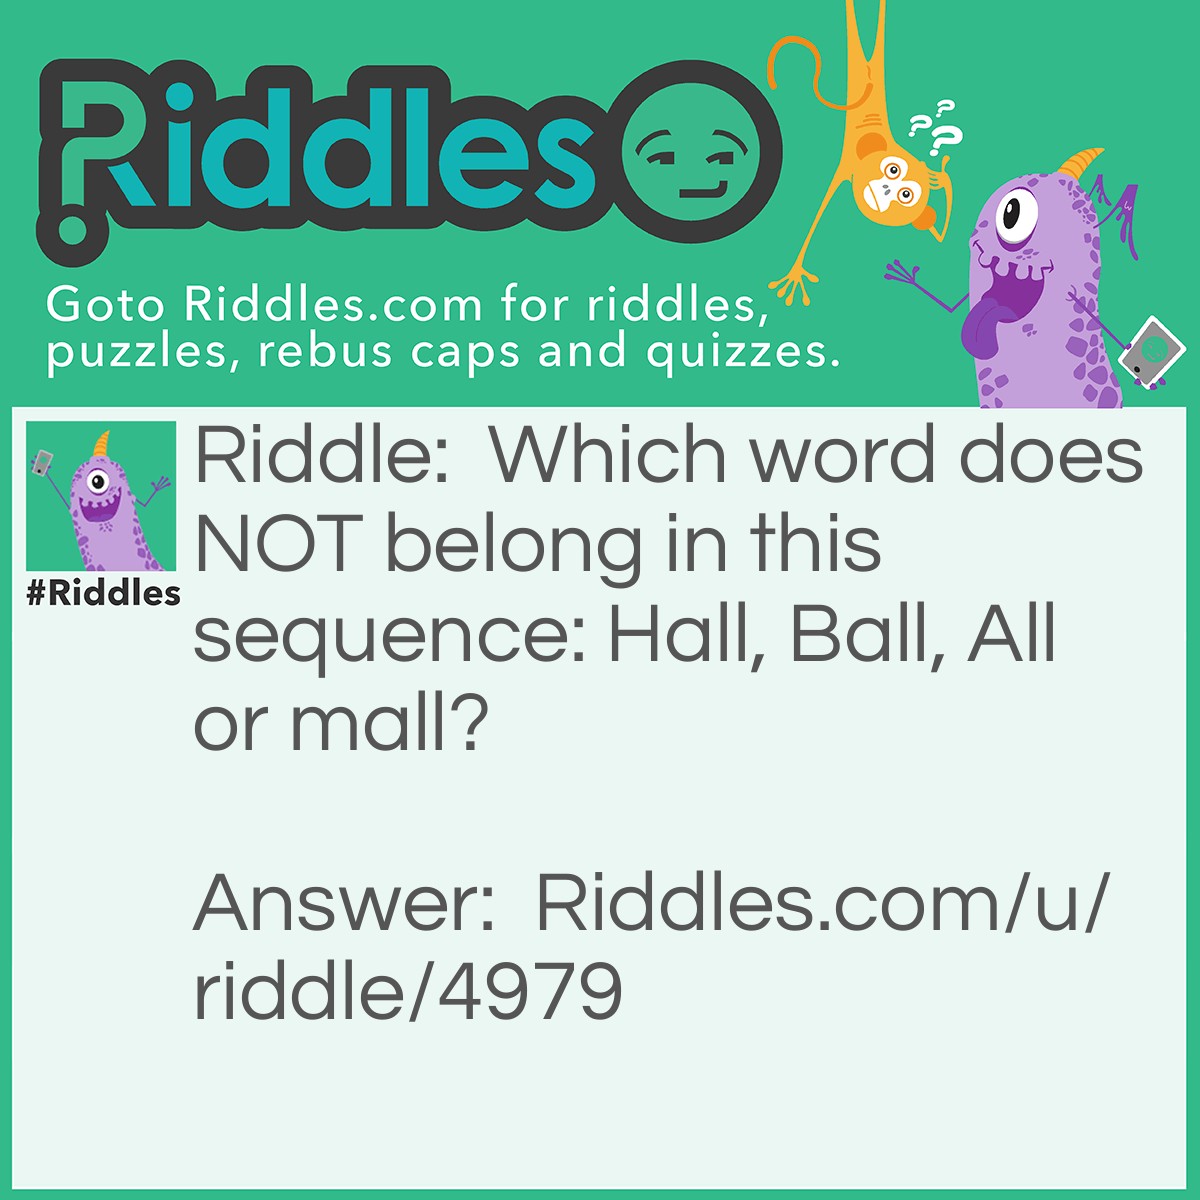 Riddle: Which word does NOT belong in this sequence: Hall, Ball, All or mall? Answer: OR.